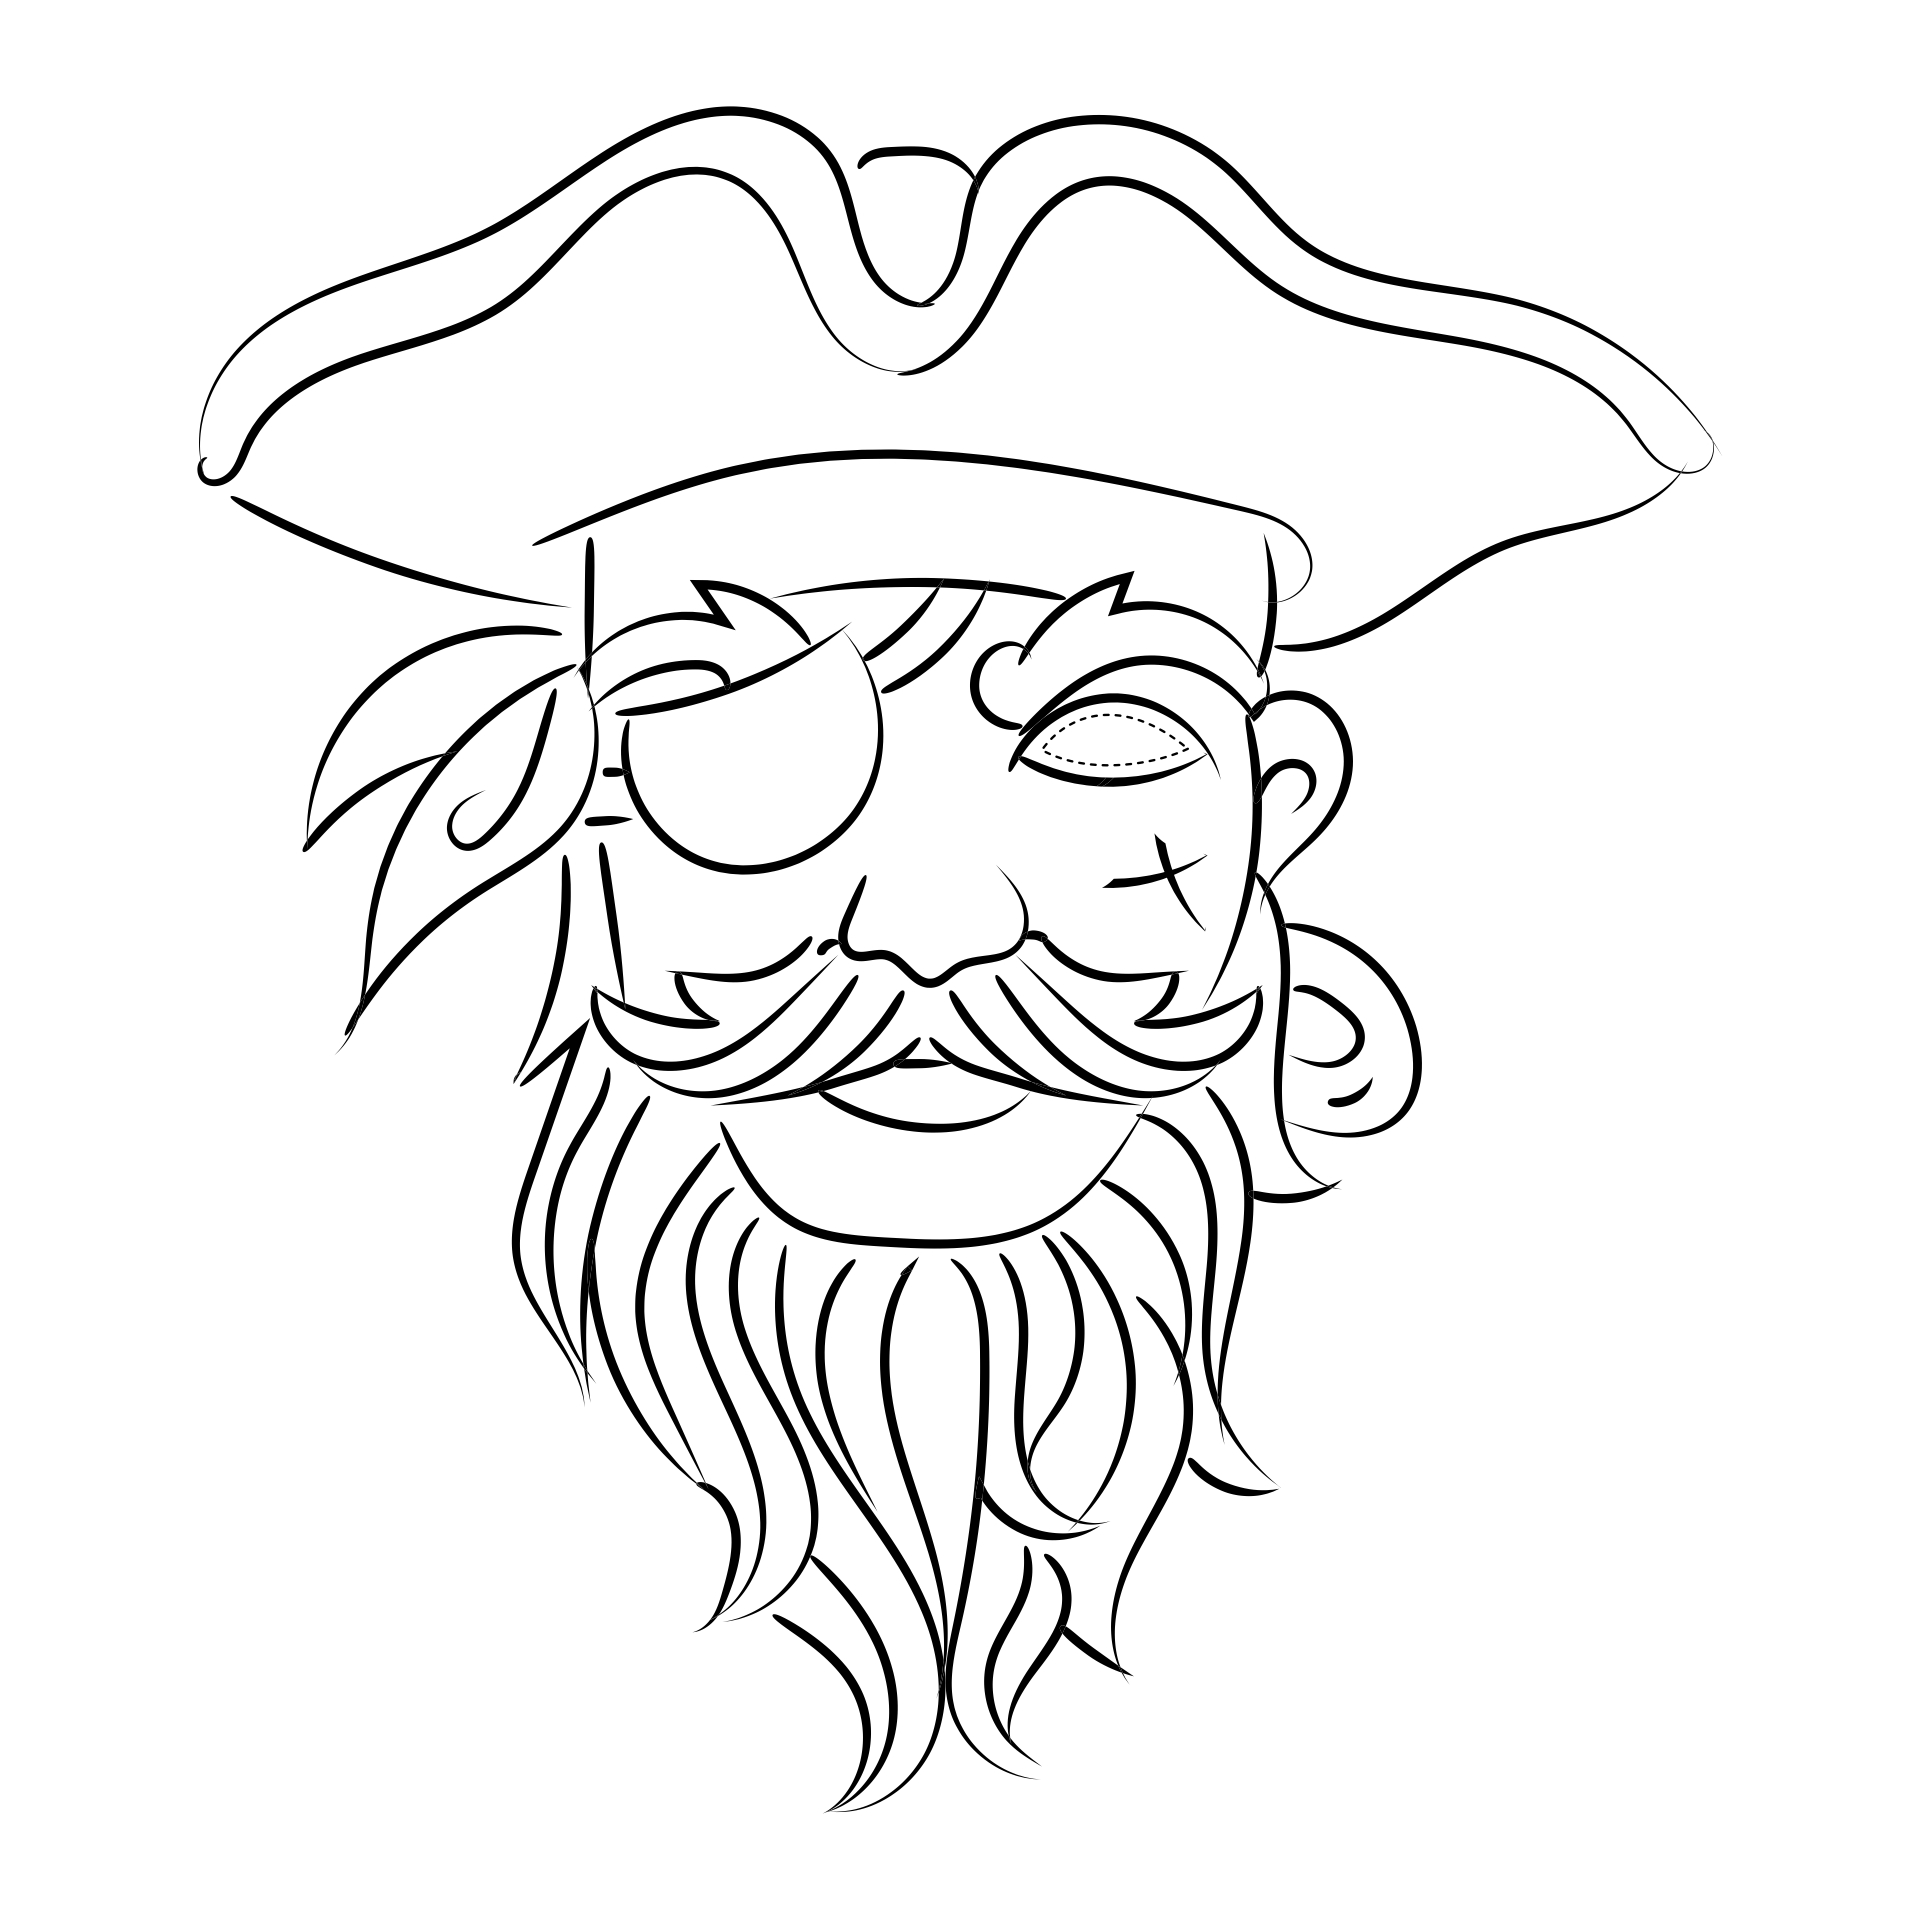 Printable Pirate Mask Coloring Page